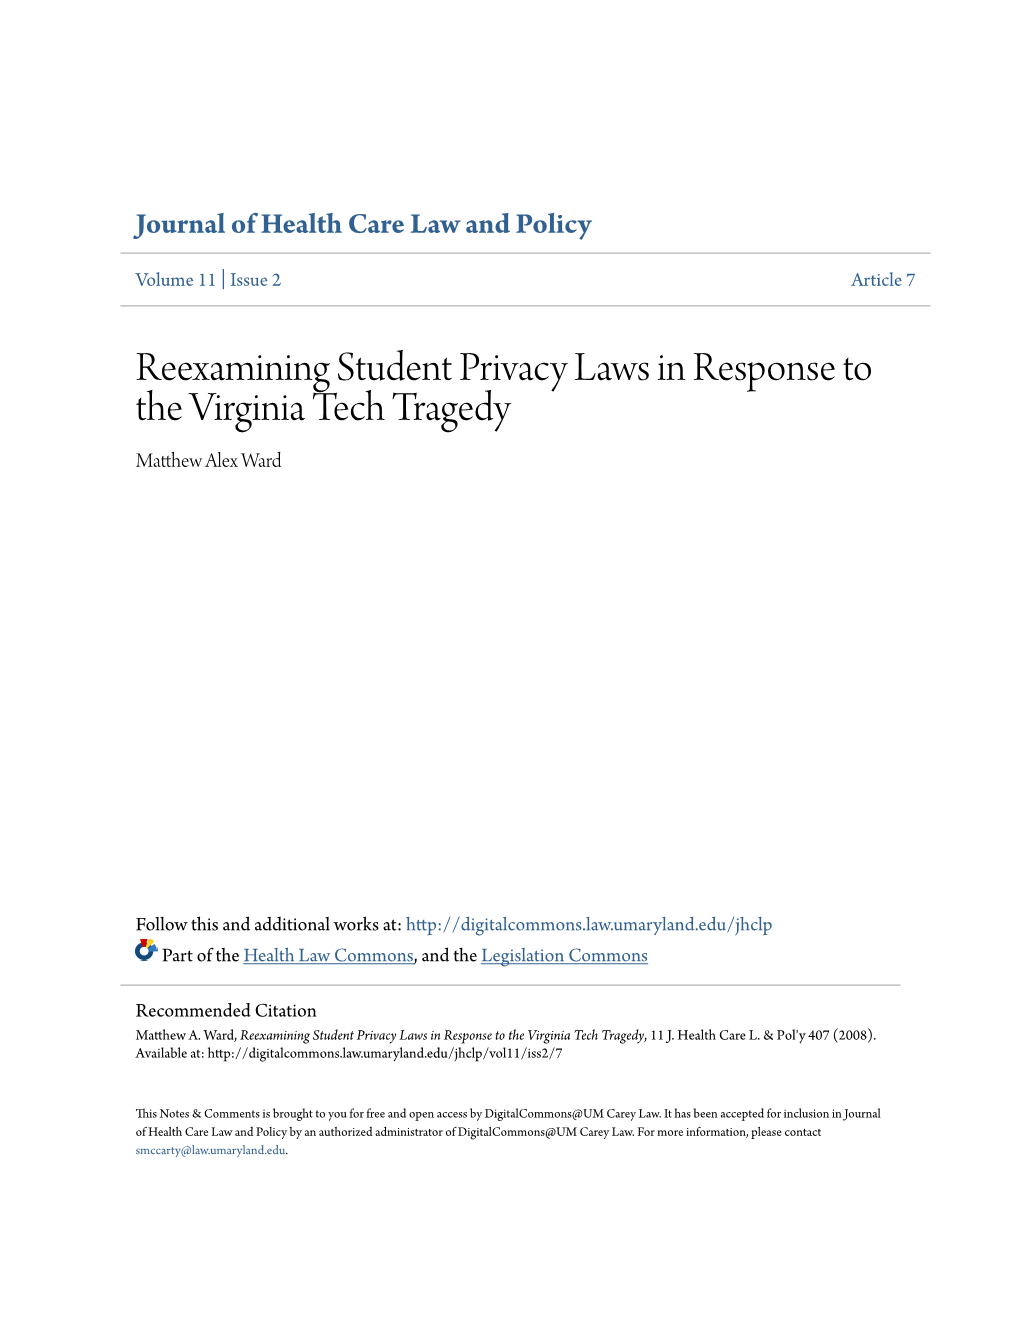 Reexamining Student Privacy Laws in Response to the Virginia Tech Tragedy Matthew Alex Aw Rd